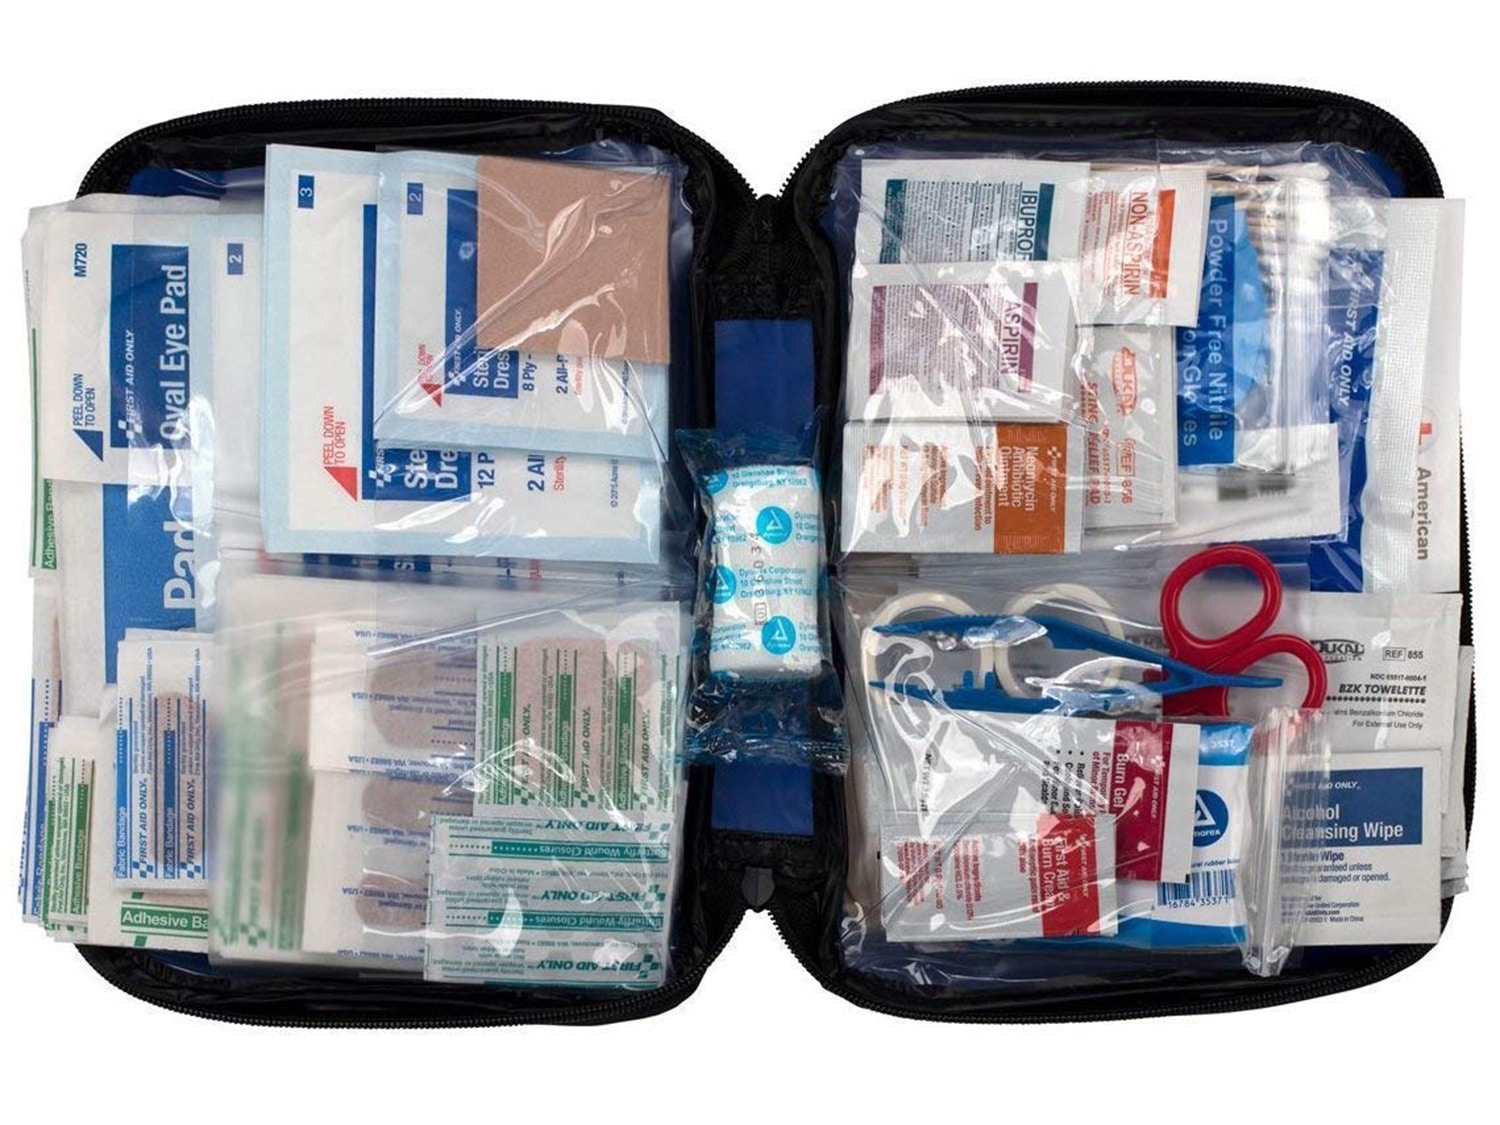 All-Purpose First Aid Kit